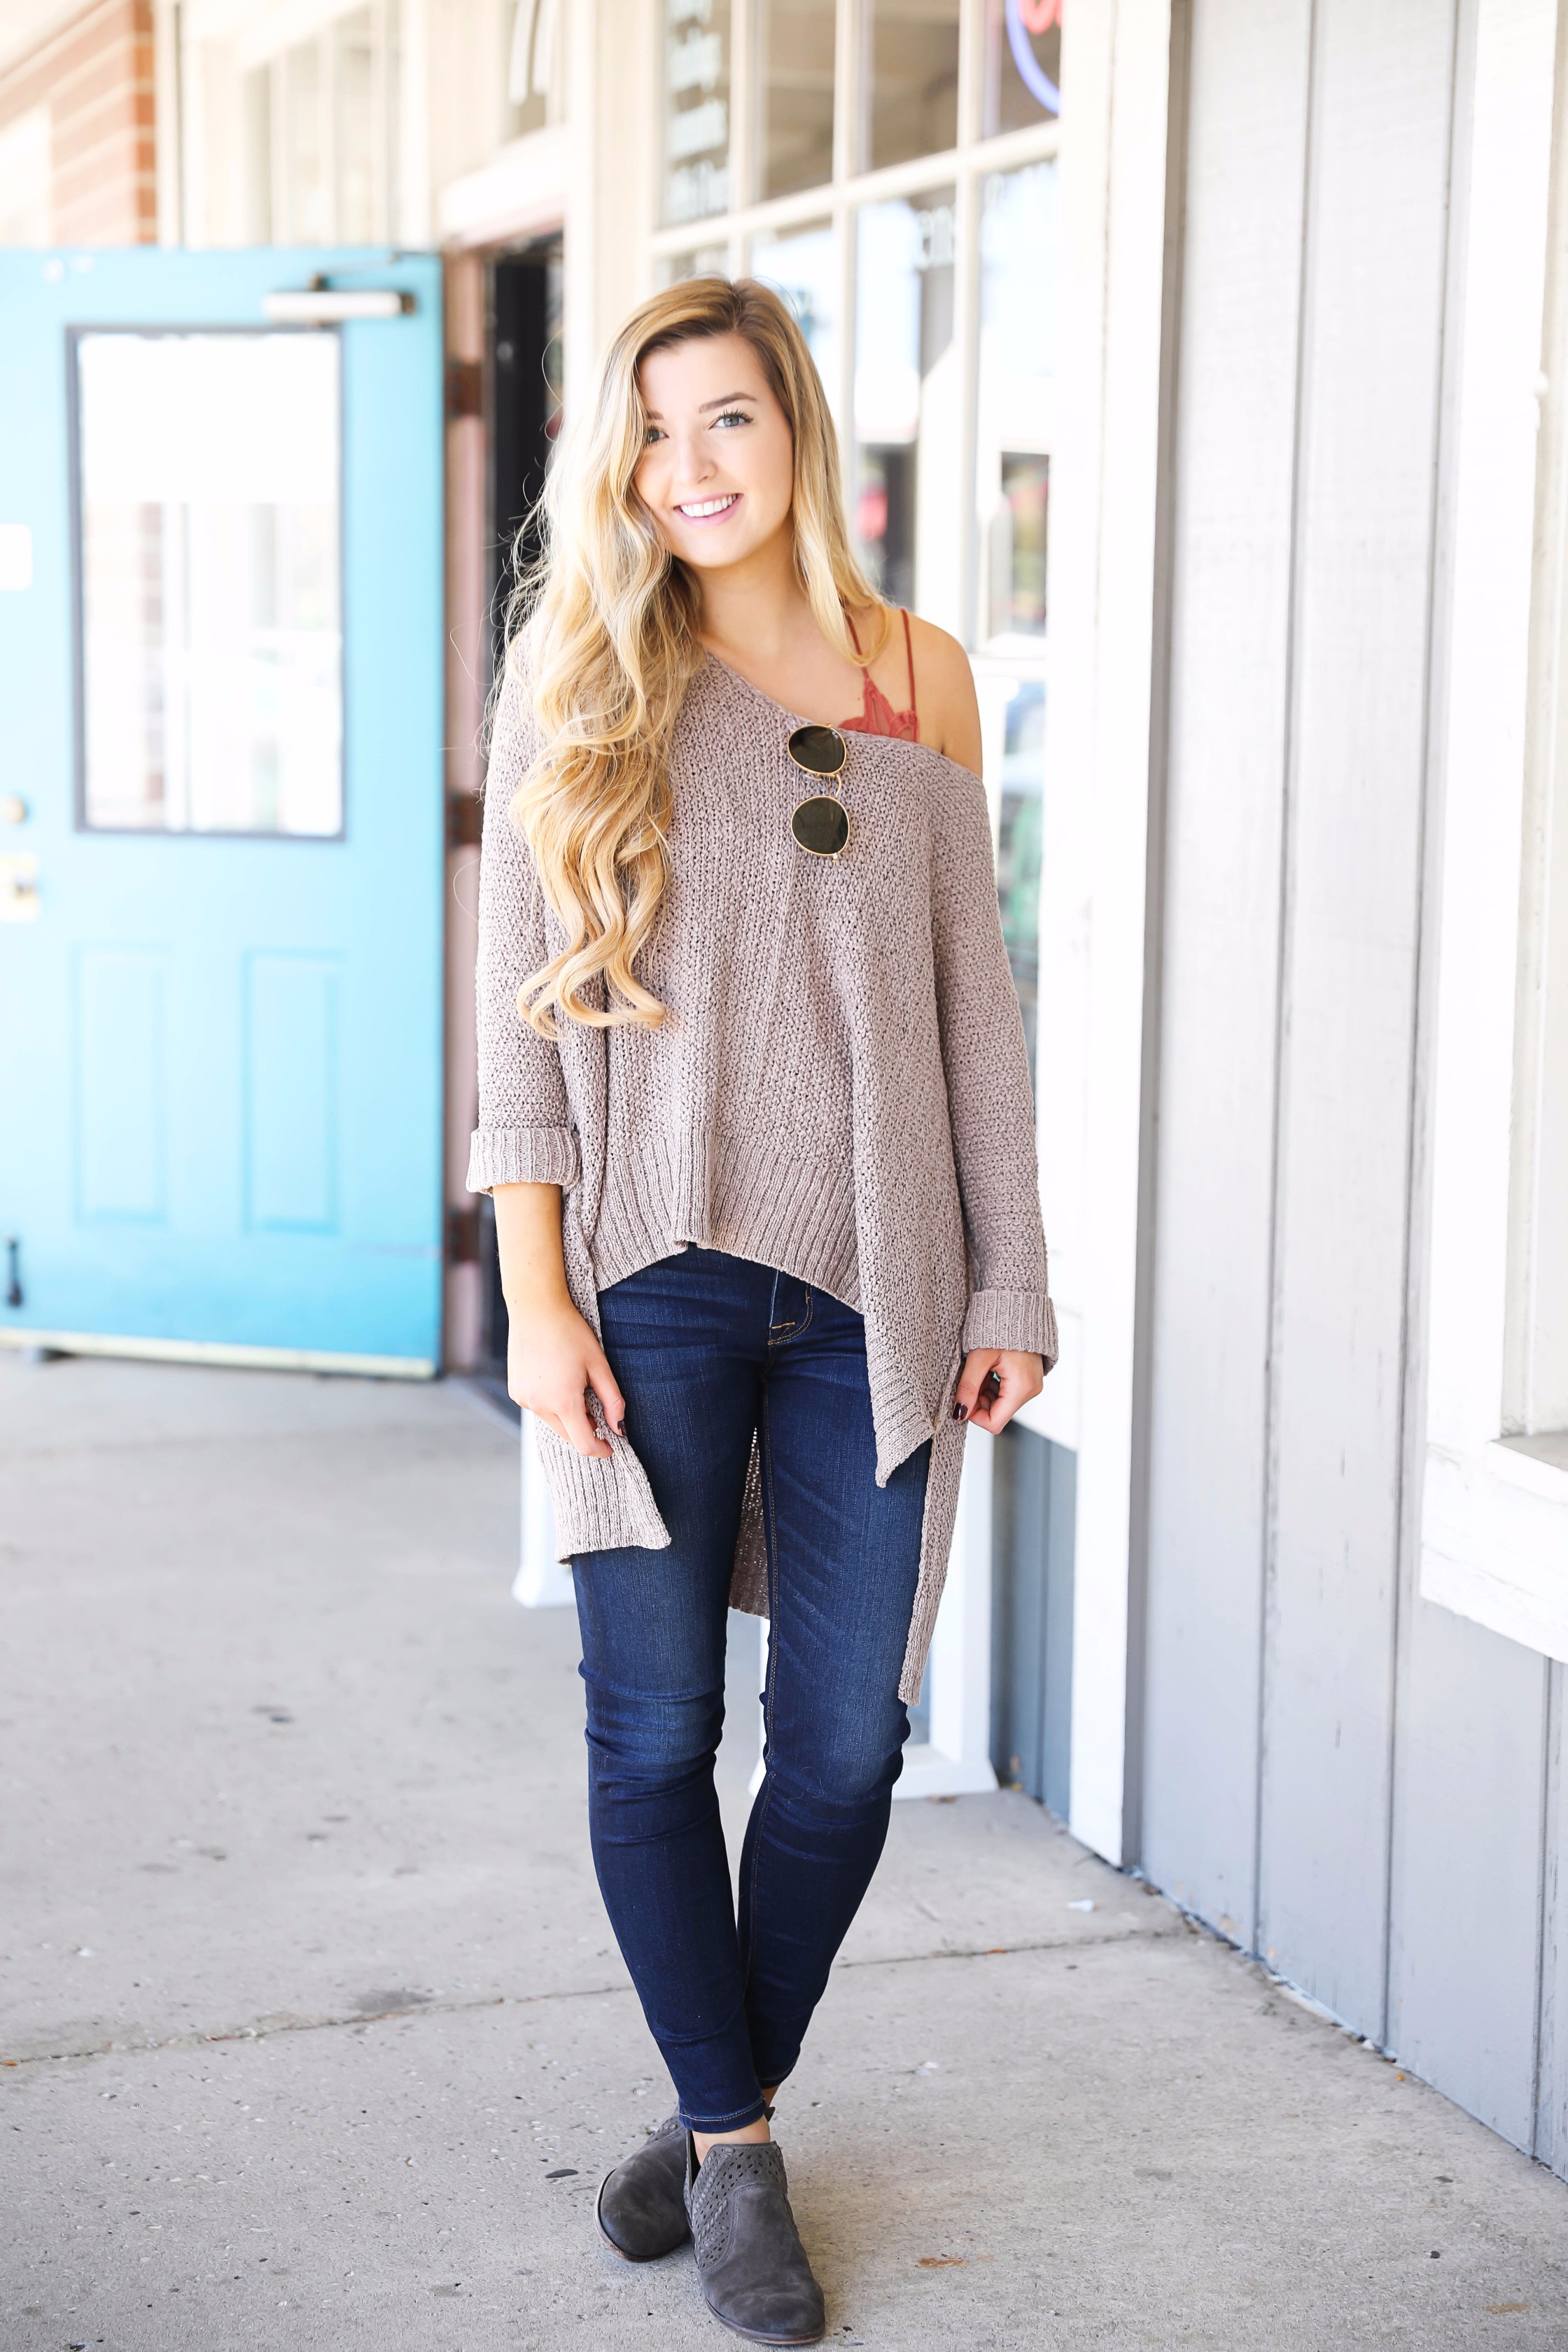 Slouchy off the shoulder sweater with a lace free people bralette! Super cute fall outfit for casual days or can be dressed up! Check out the details on fashion blog daily dose of charm by lauren lindmark